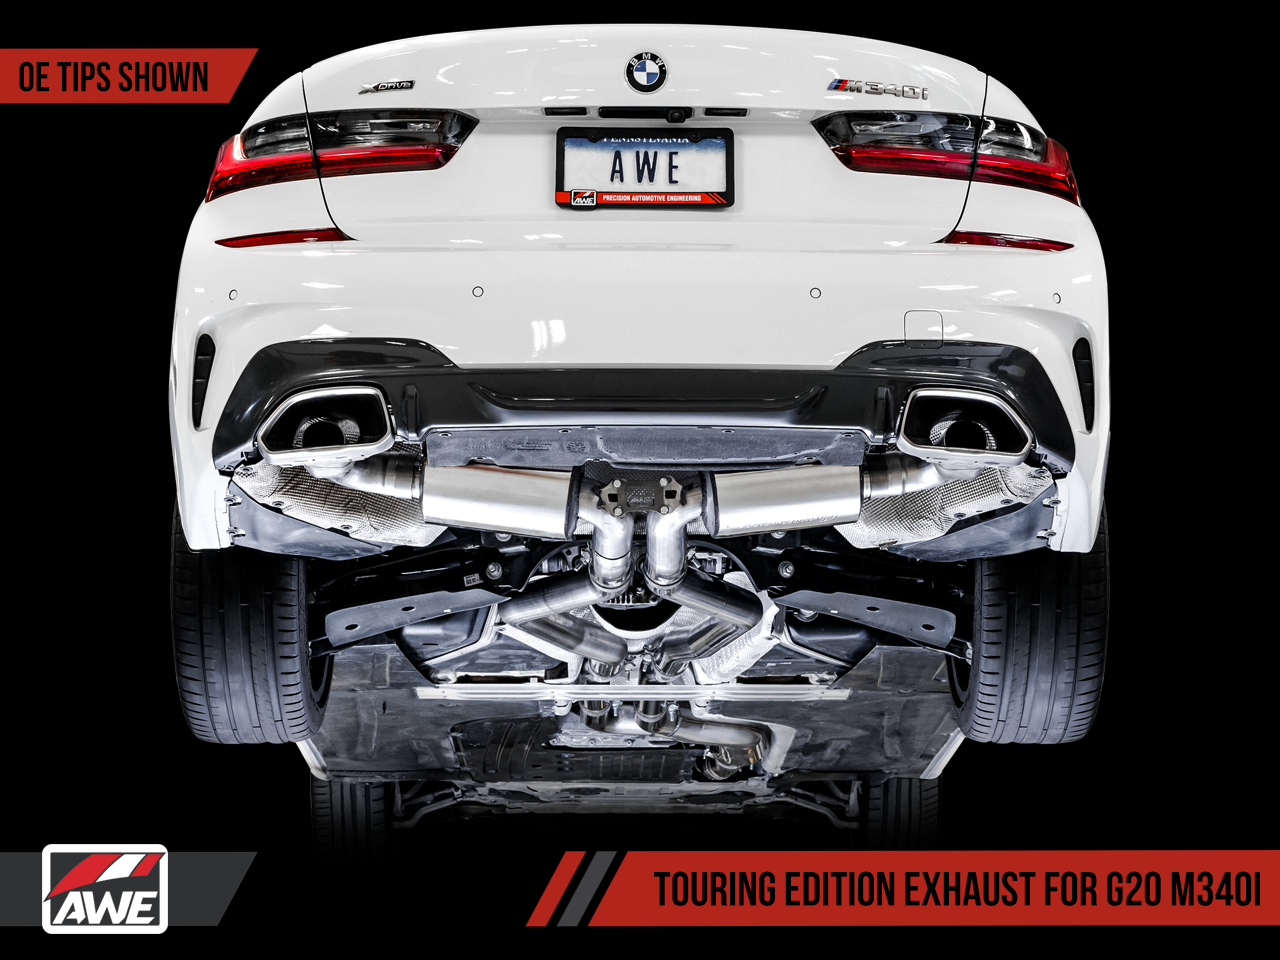 AWE Non-Resonated Touring Edition Exhaust for G20 M340i - OE Tips